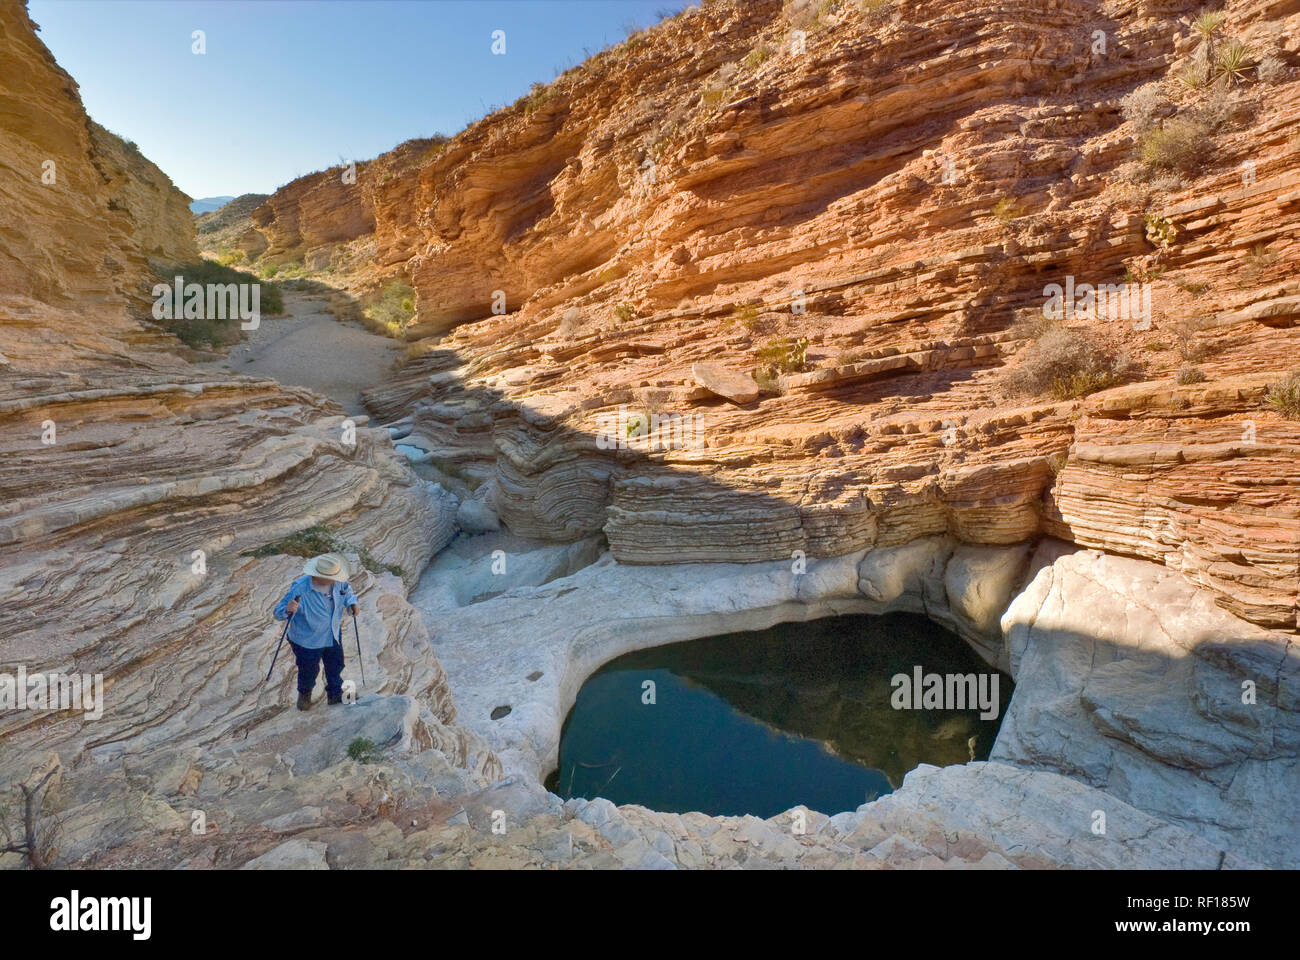 Hikers at Ernst Tinaja water pools, Chihuahuan Desert in Big Bend National Park, Texas, USA Stock Photo